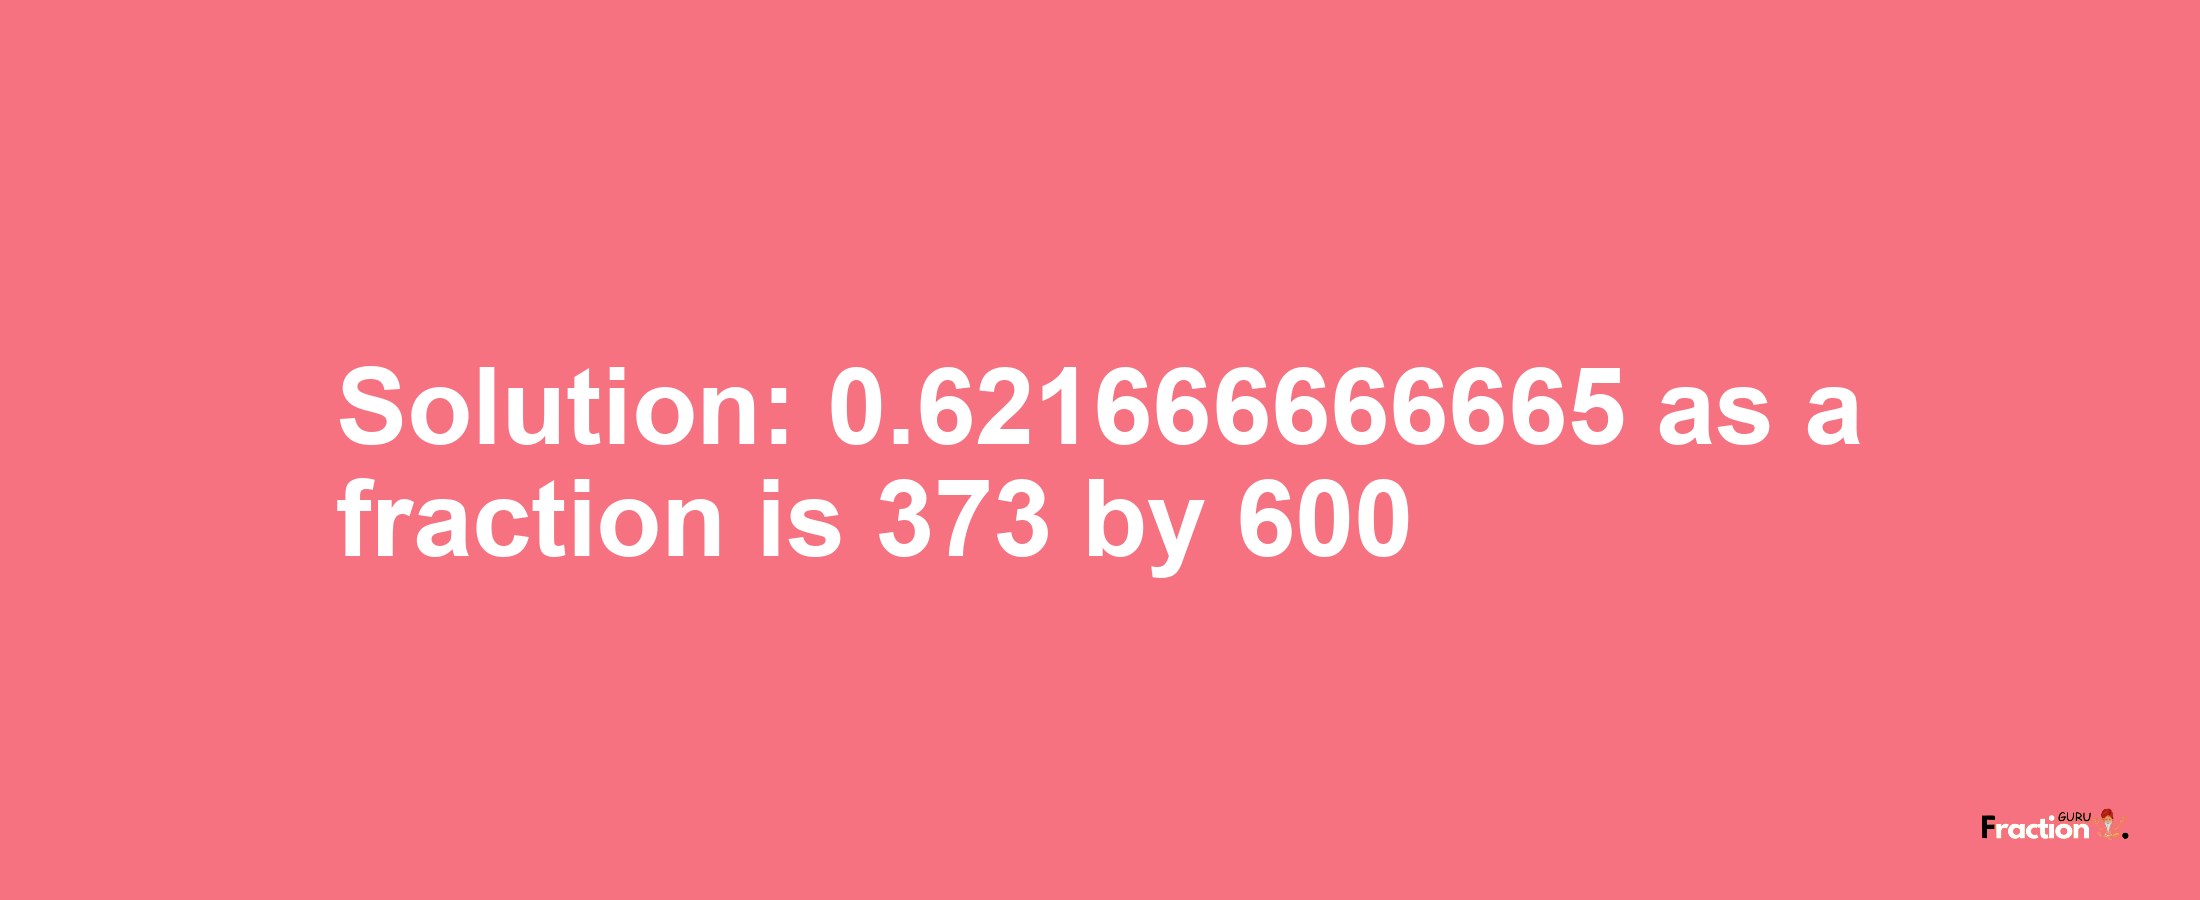 Solution:0.621666666665 as a fraction is 373/600